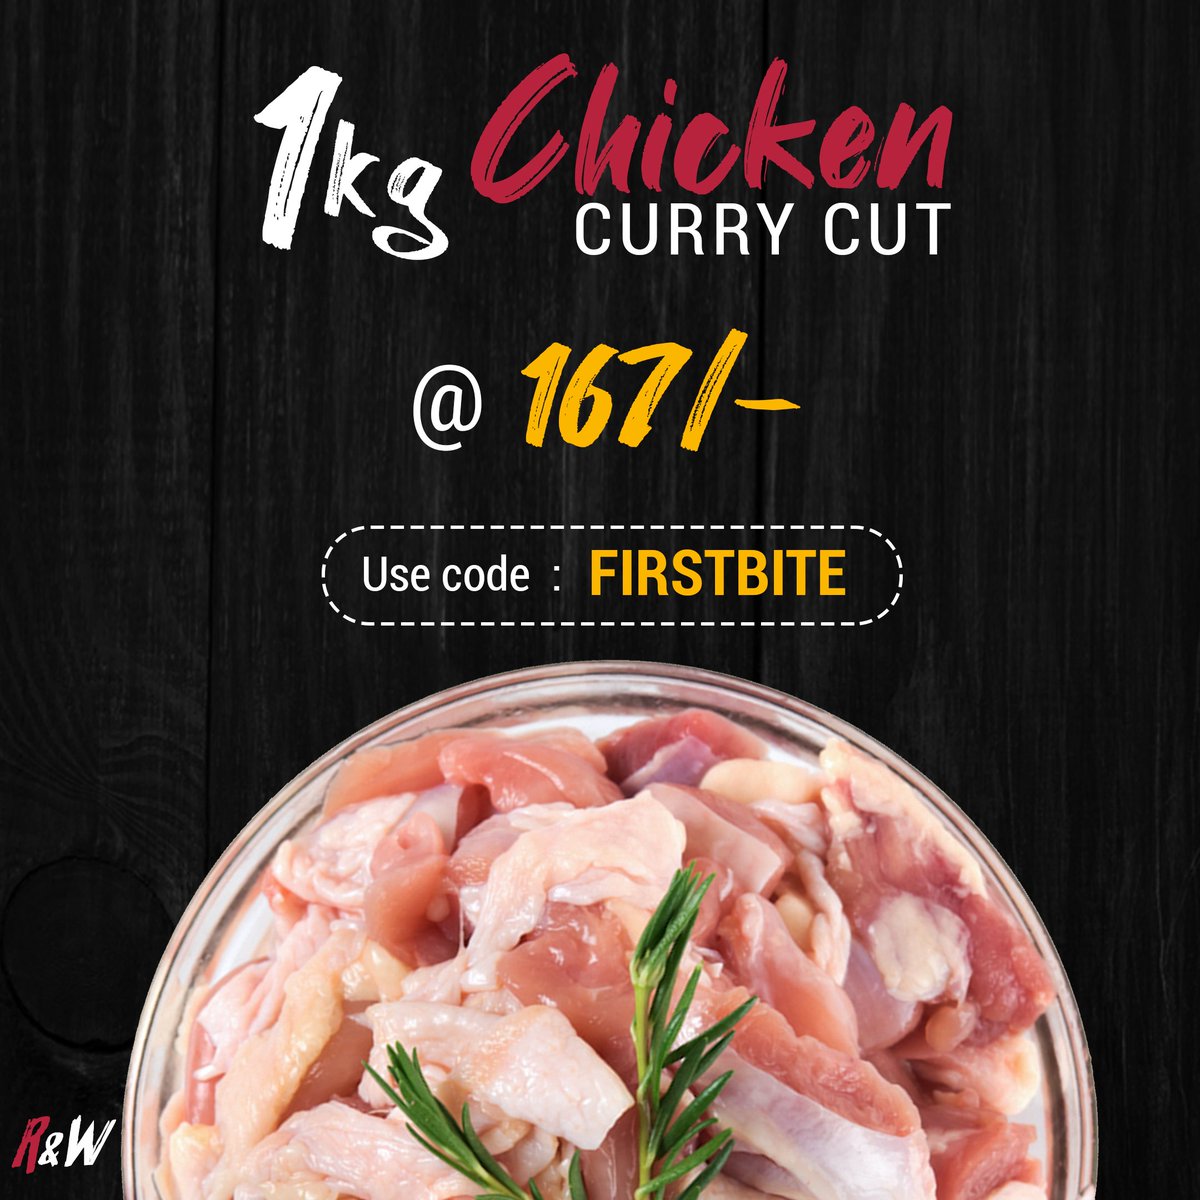 Amazing offer!! Get 1kg Chicken Curry Cut just for Rs 167
Use code - FIRSTBITE. Offer valid for new users.

Link - bit.ly/2m0LYTw

#chicken #chickenmania #meat #meatonline #mutton #seafood #fish #prawns #spicymeat #barbeque #grillovers #meatporn #foodporn #instafood